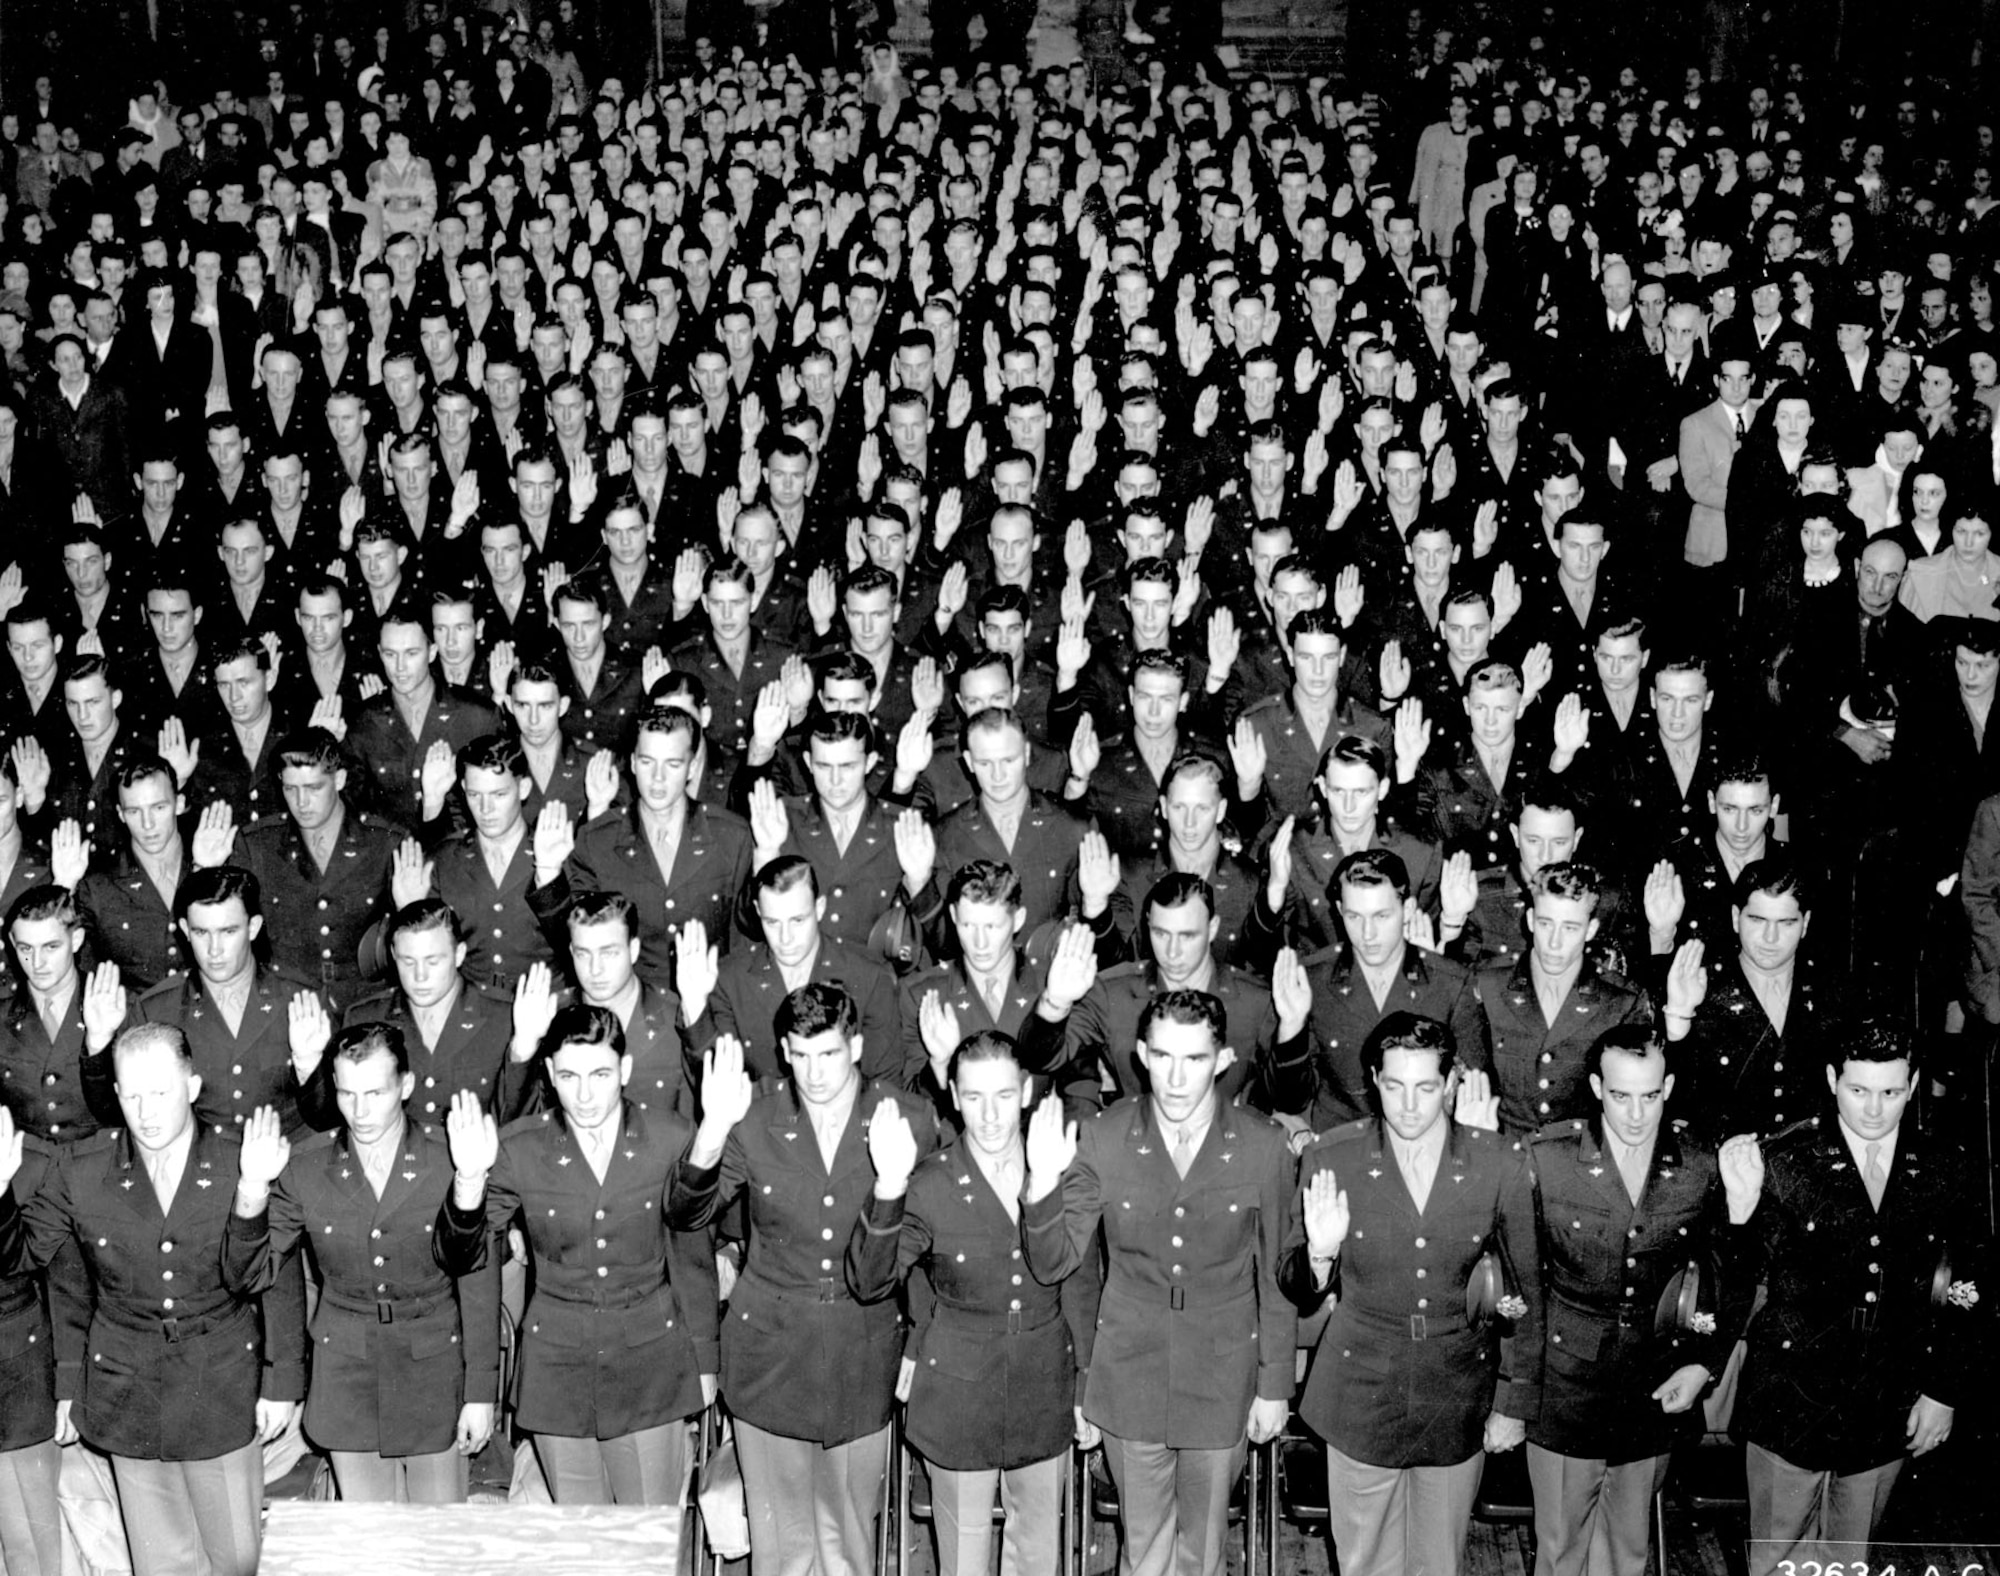 The Civilian Pilot Training Program and War Training Service produced 435,165 pilots for the war effort. During the war, all were required to enlist in military service. (U.S. Air Force photo)